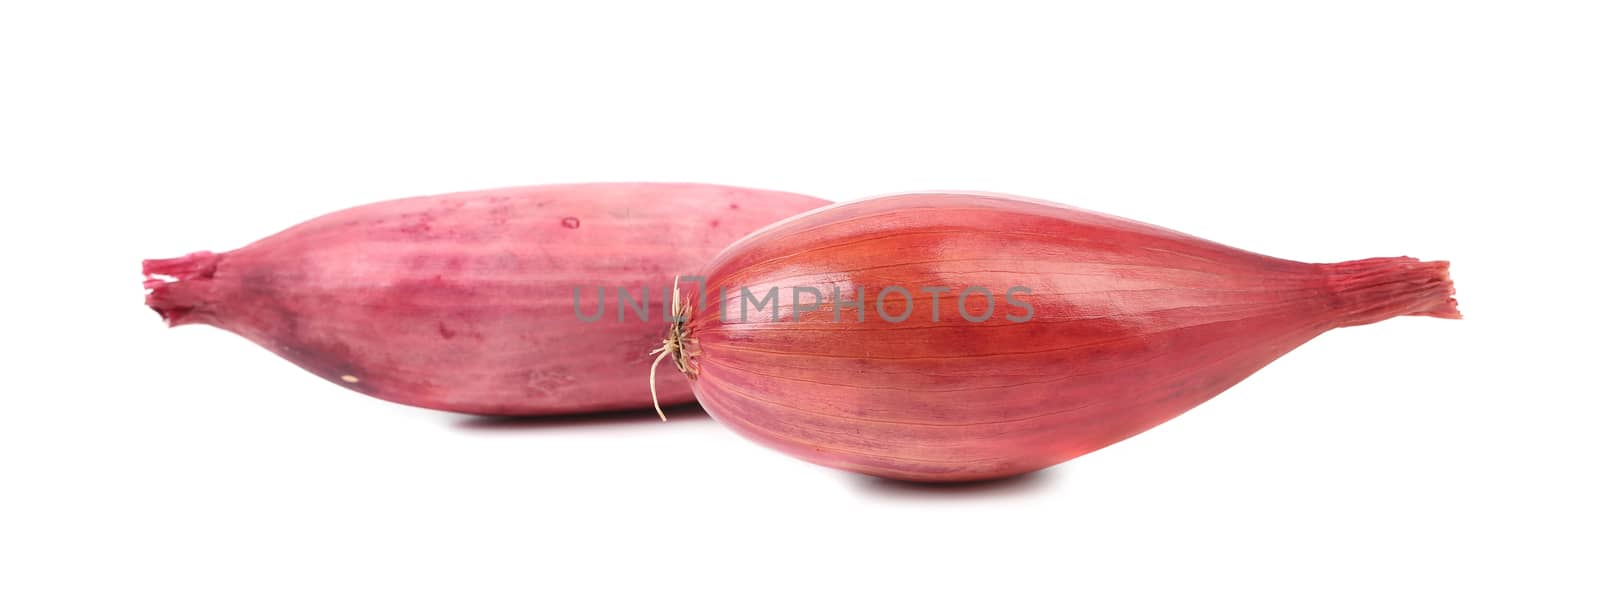 Close up of two red onions. Isolated on a white background.